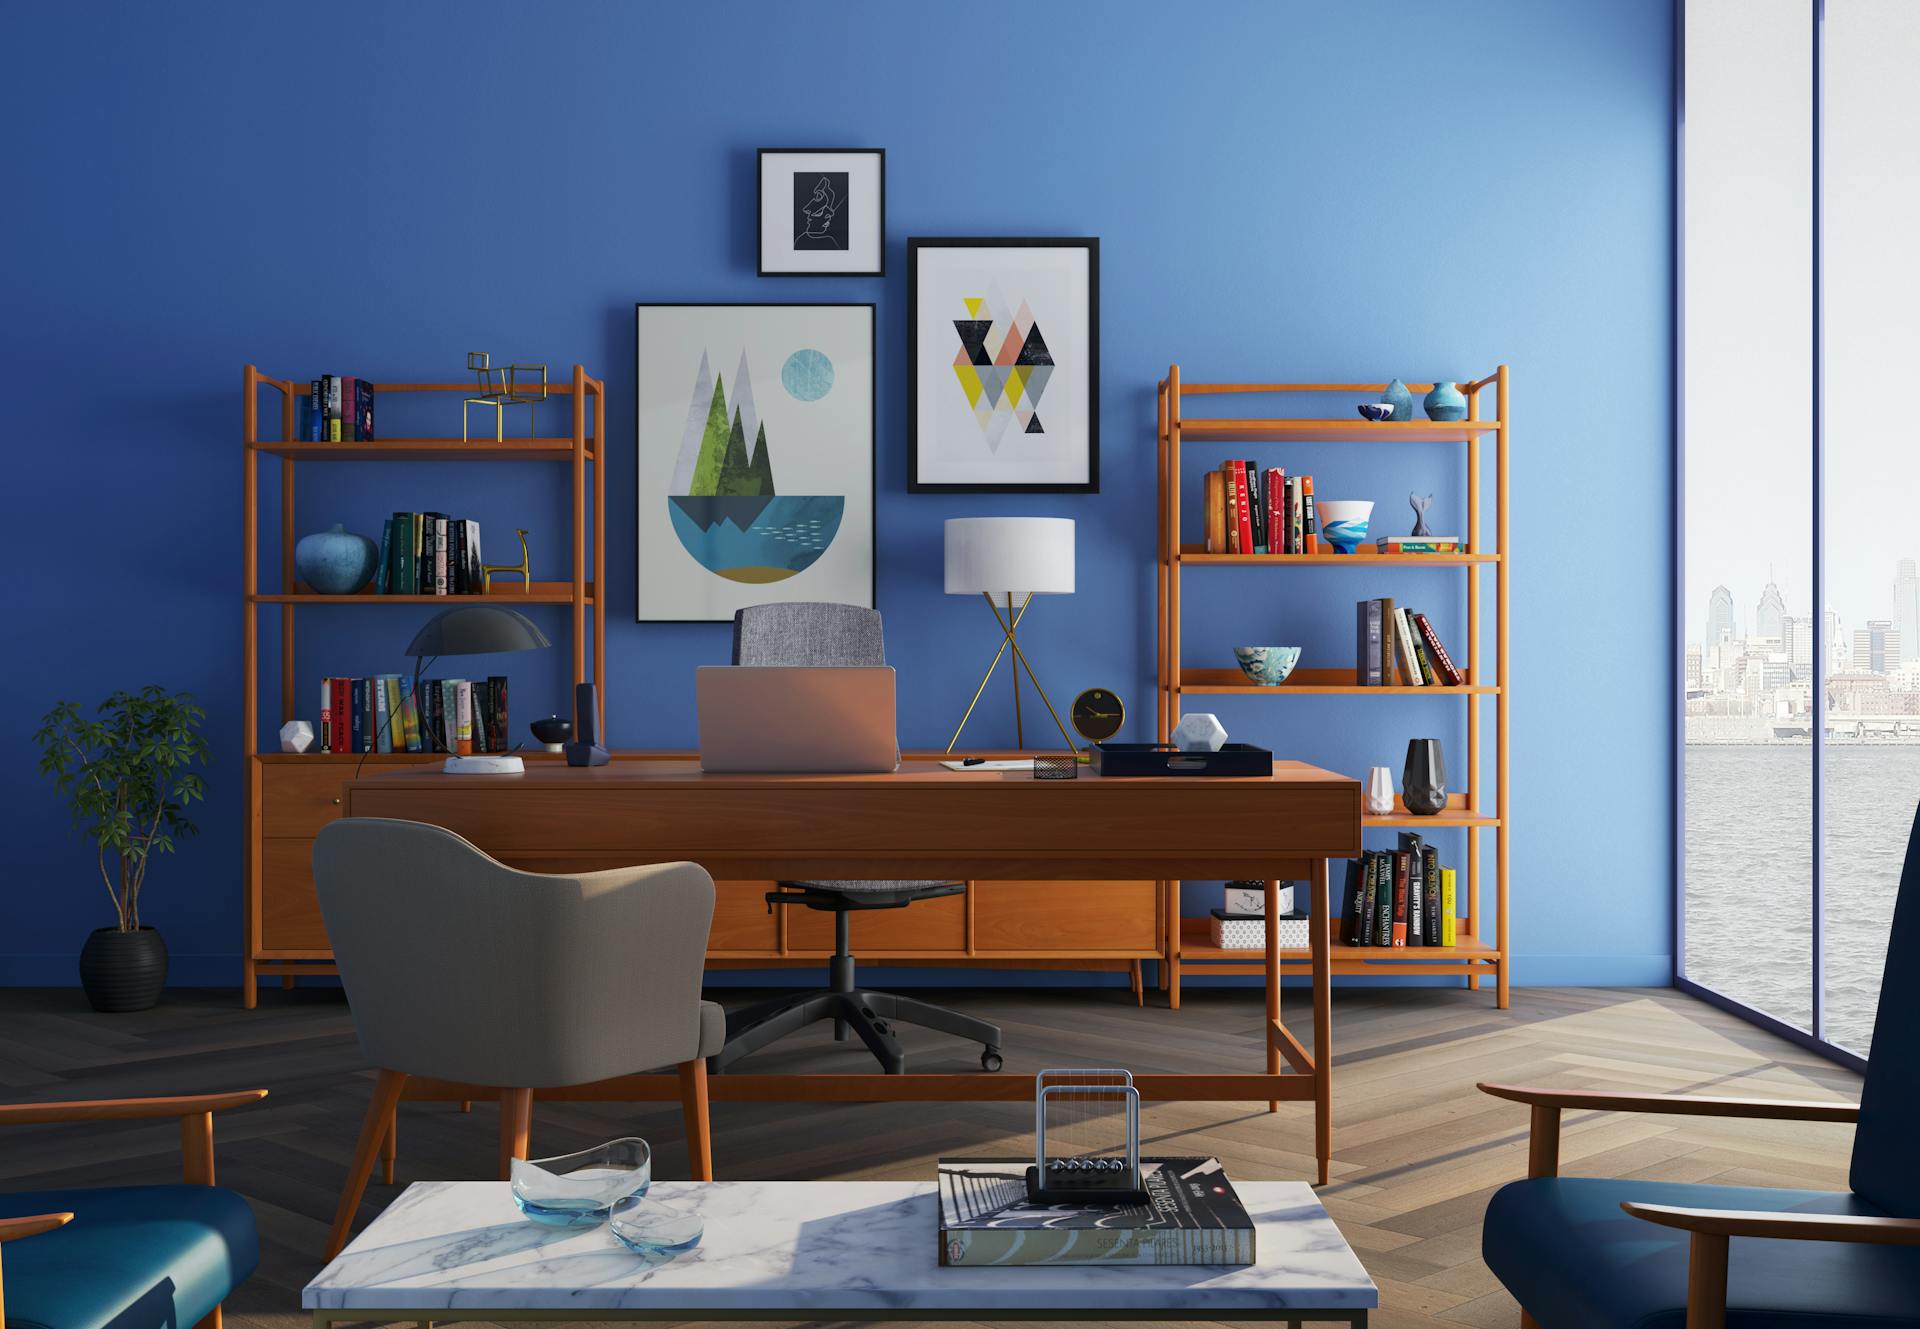 A fancy office with a blue wall | Source: Pexels